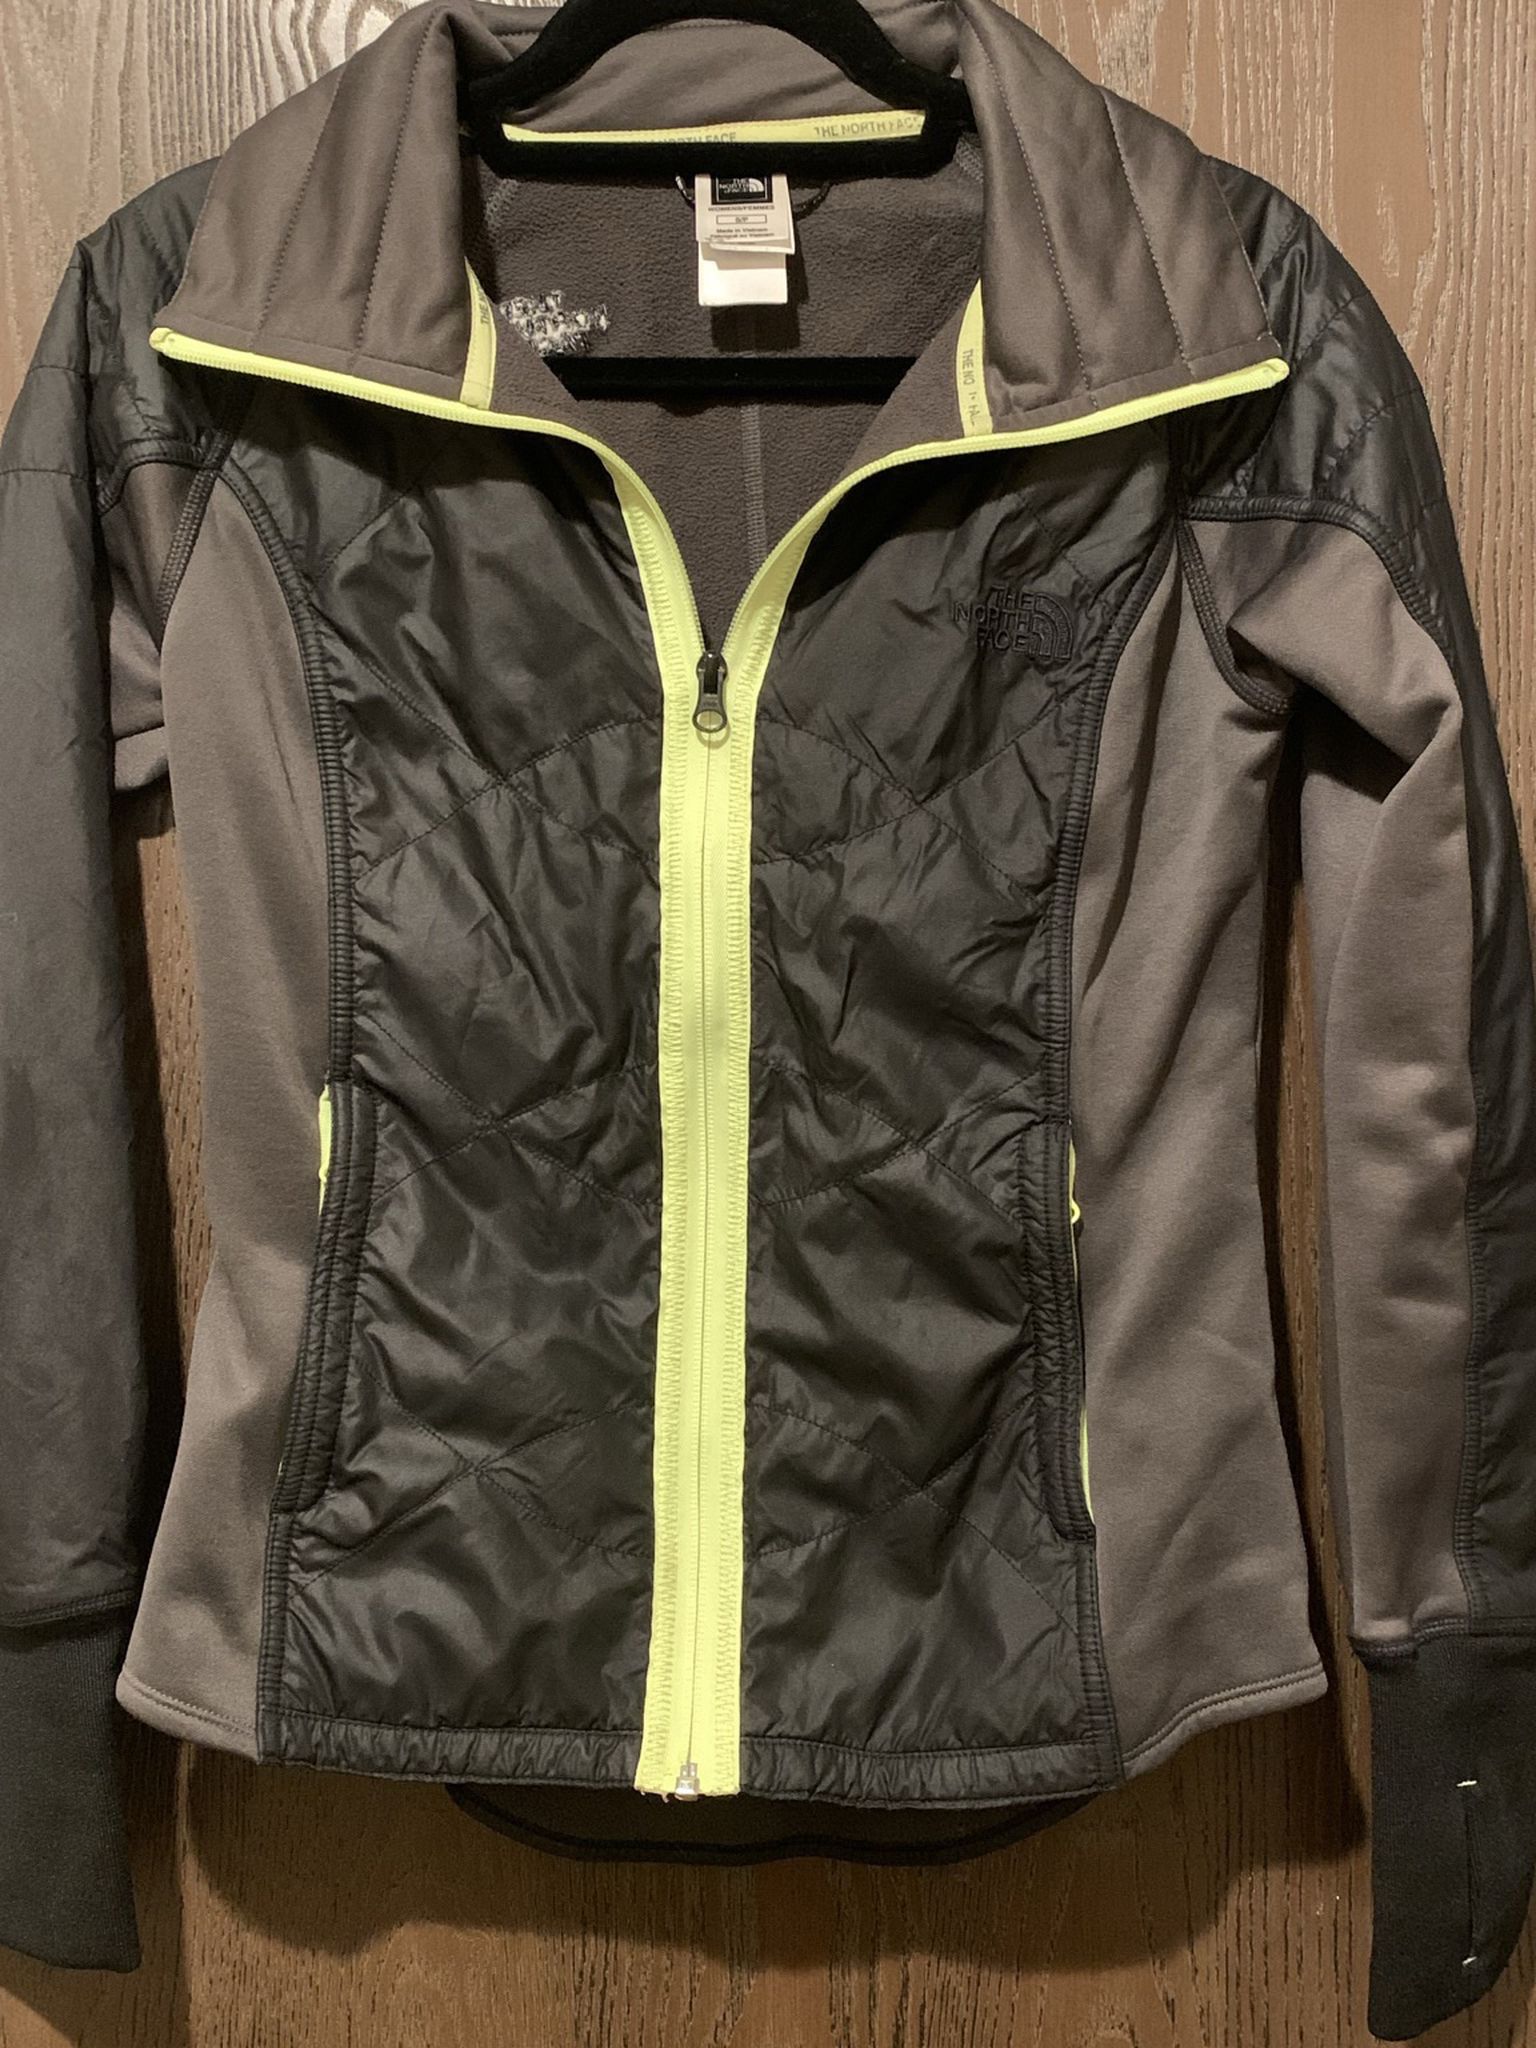 North Face jacket Women’s Size Small